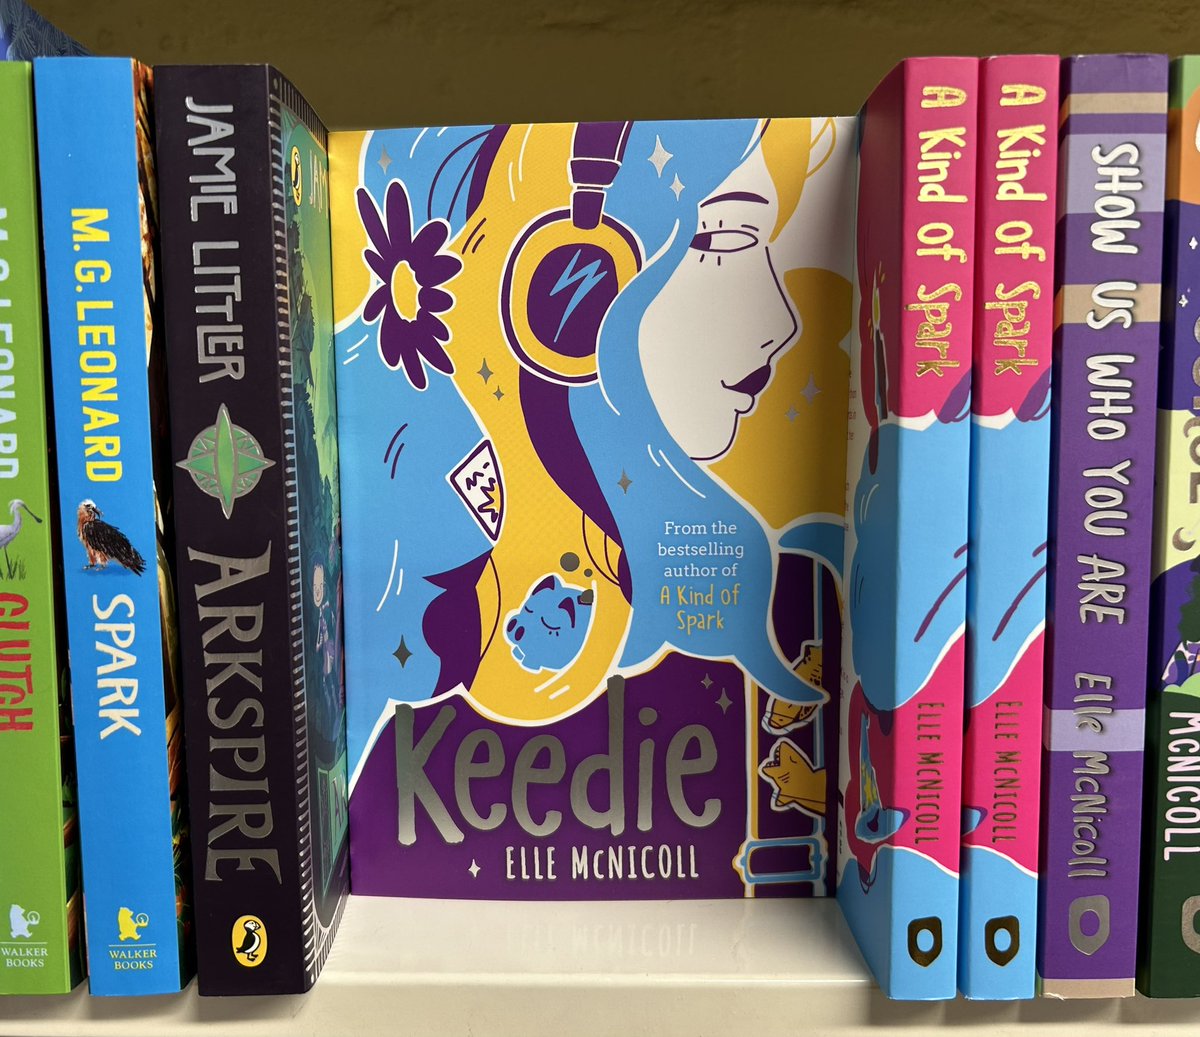 Very happy publication day to @BooksandChokers - I had the pleasure of reading both A Kind of Spark and Keedie, and they are superb! For anyone who read AKOS and wants to know more about Addie’s firecracker of an older sibling, this book absolutely delivers!